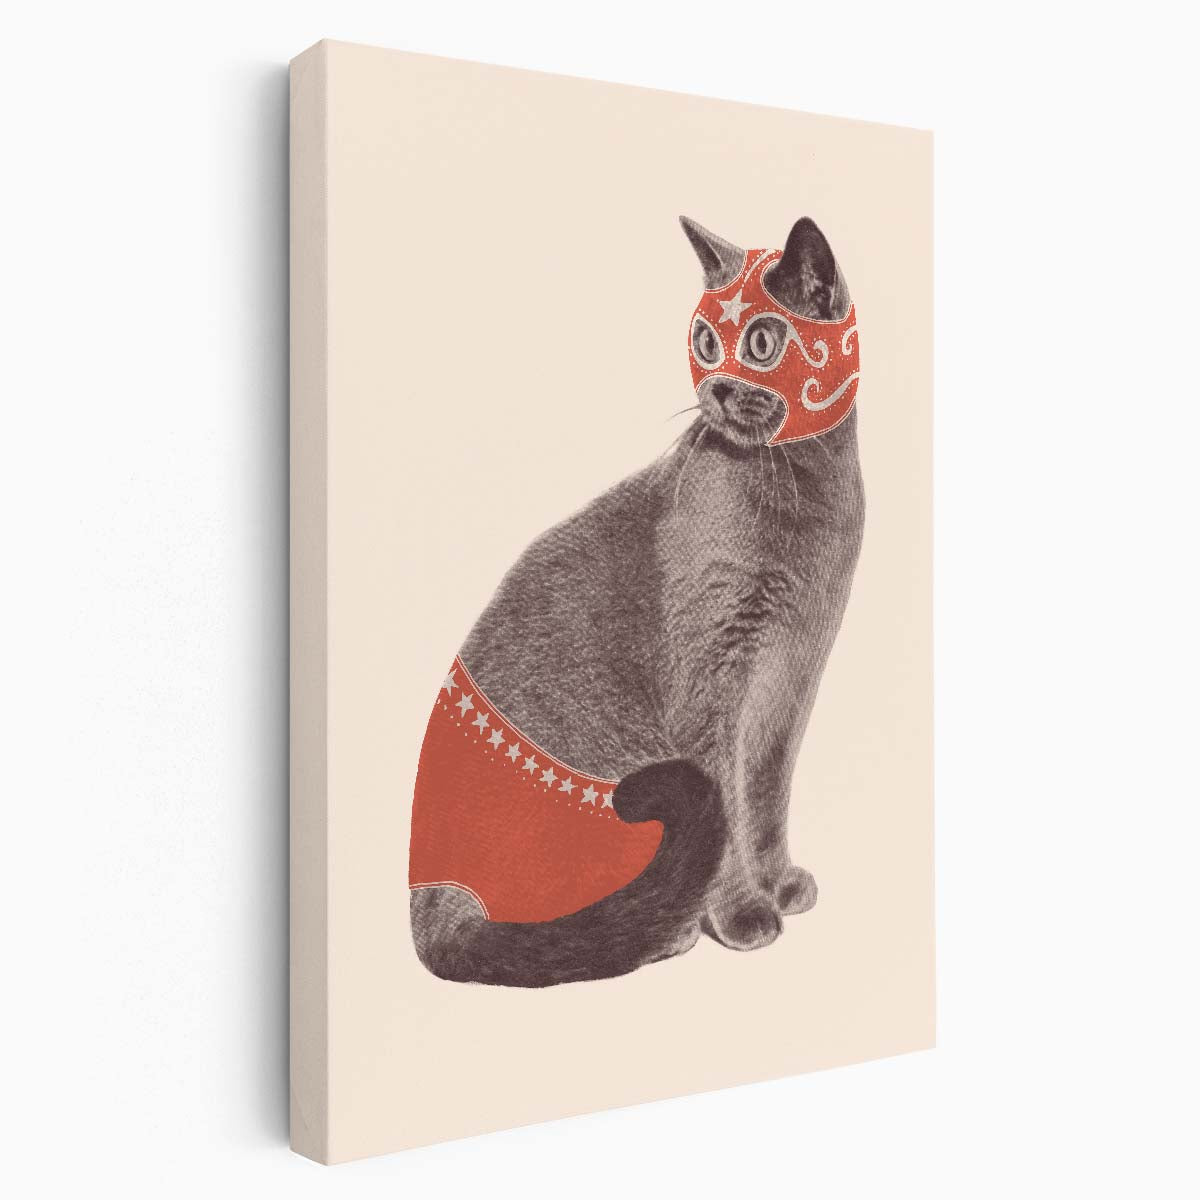 Funny Cat Illustration Wall Art - 'Chat Catcheur' by Florent Bodart by Luxuriance Designs, made in USA